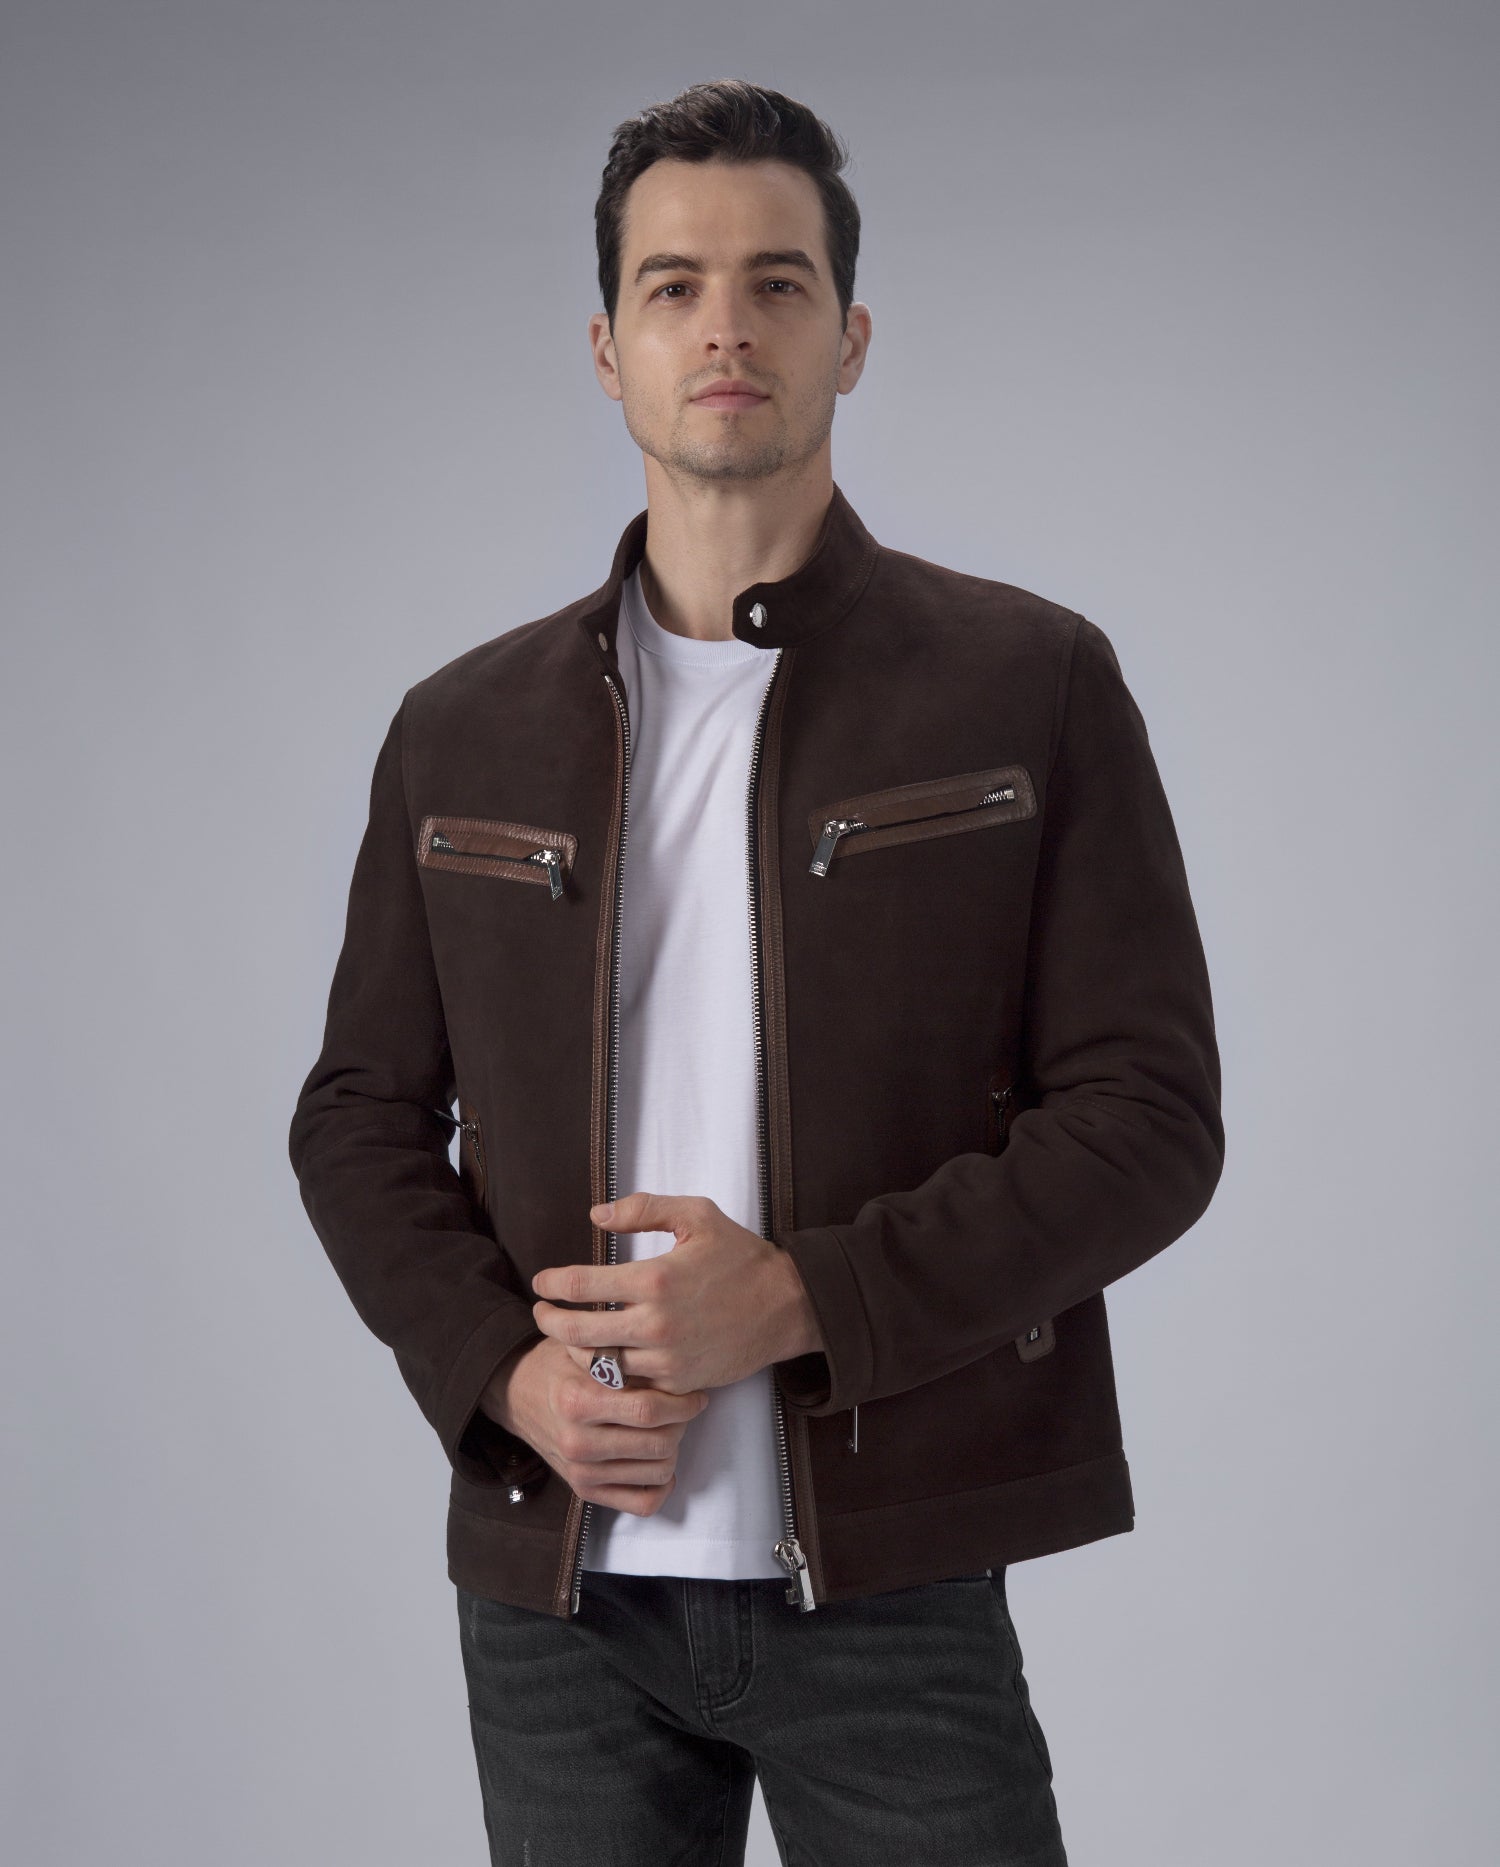 Men's Leather Jackets, Suede Jackets